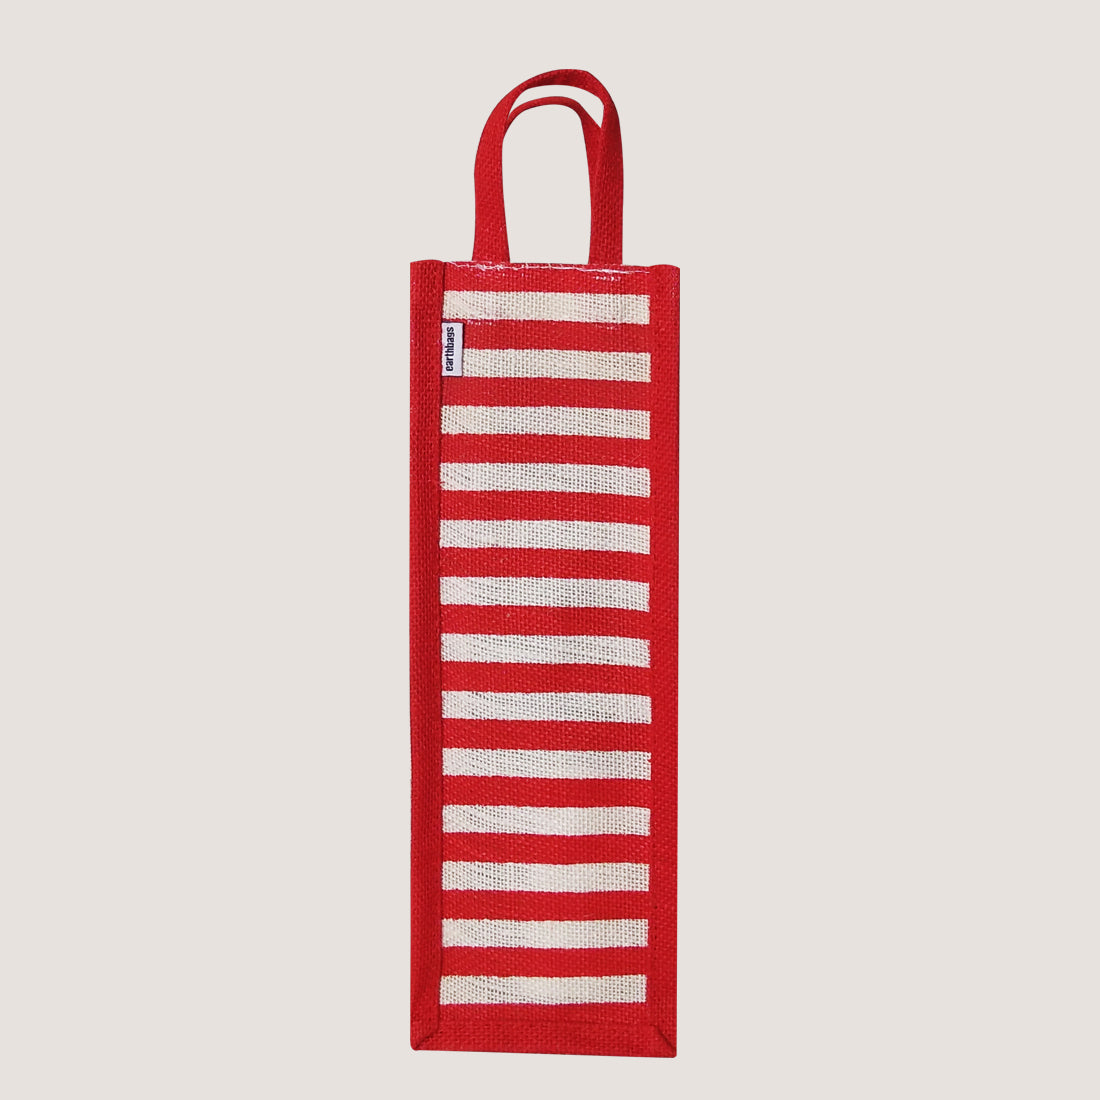 EARTHBAGS STRIPED BOTTLE BAGS IN RED AND NAVYBLUE - PACK OF 2